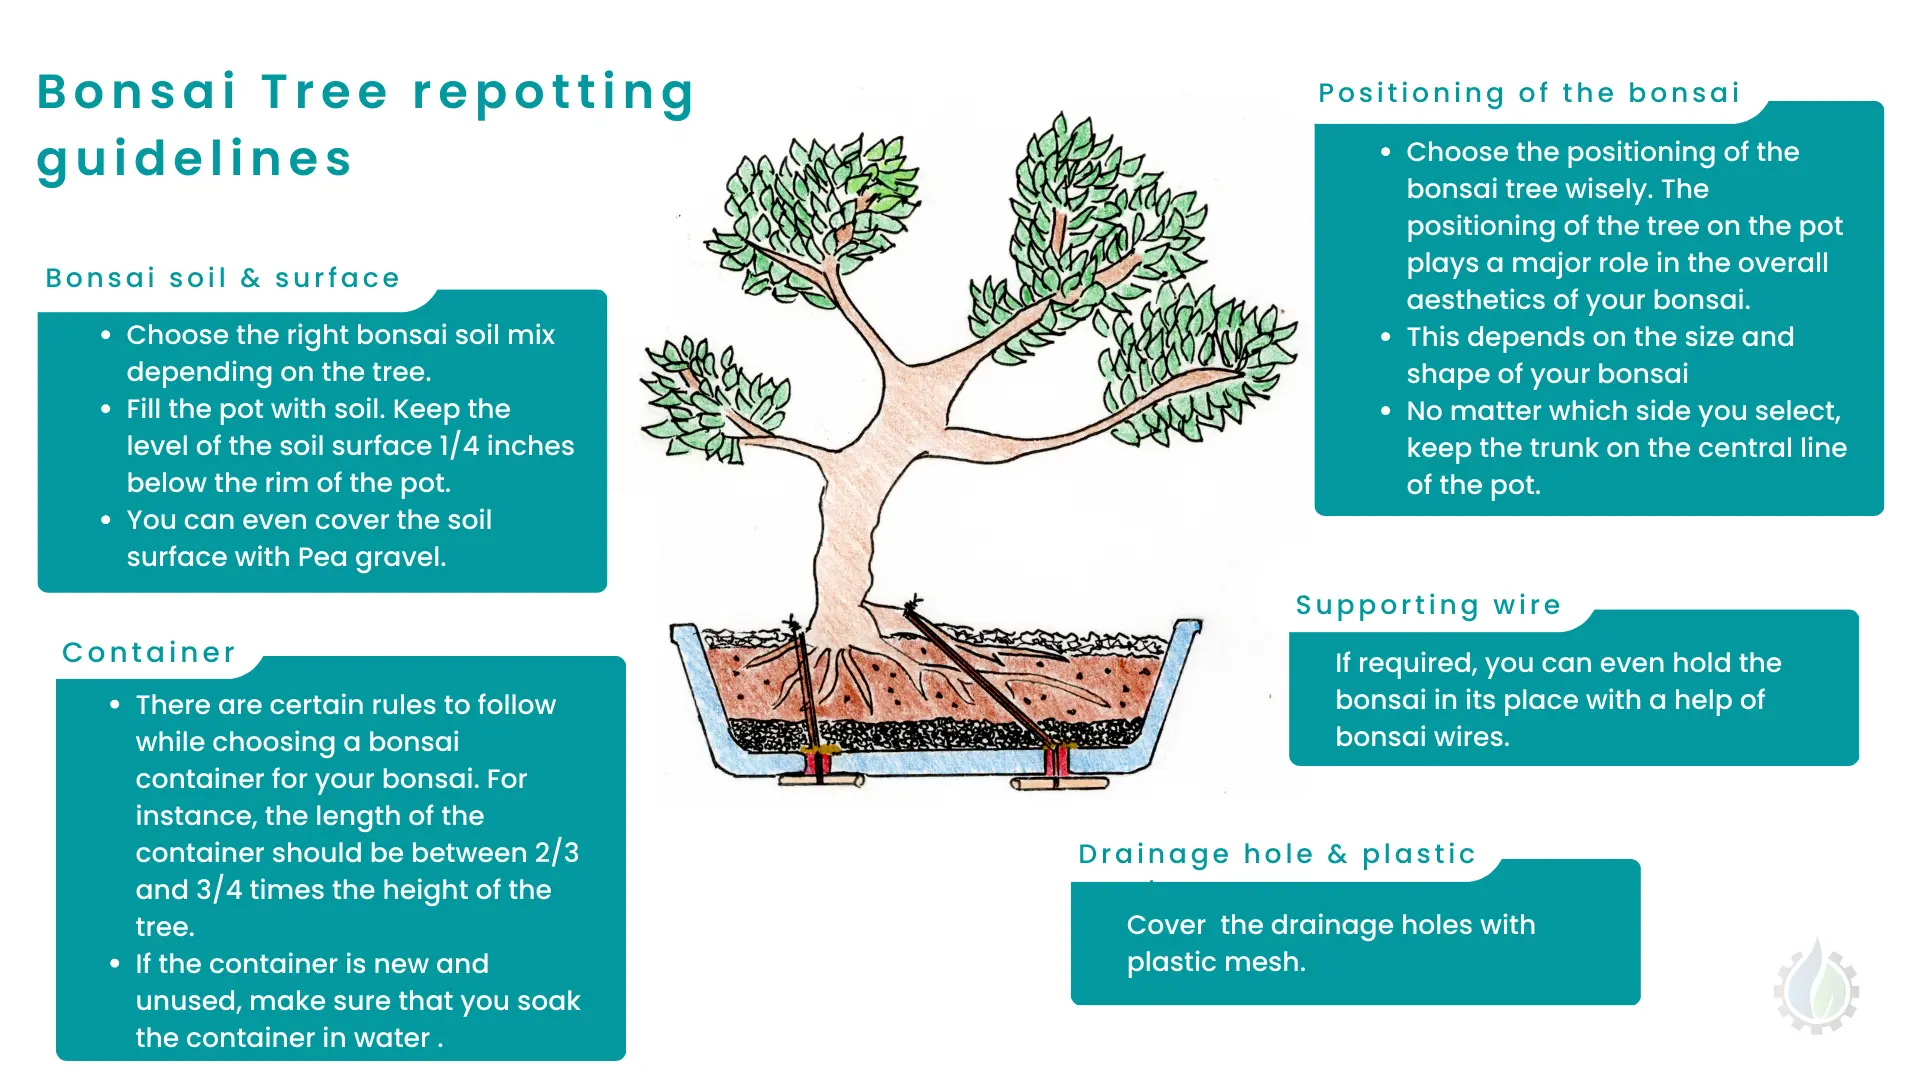 What to aim for while potting a bonsai tree